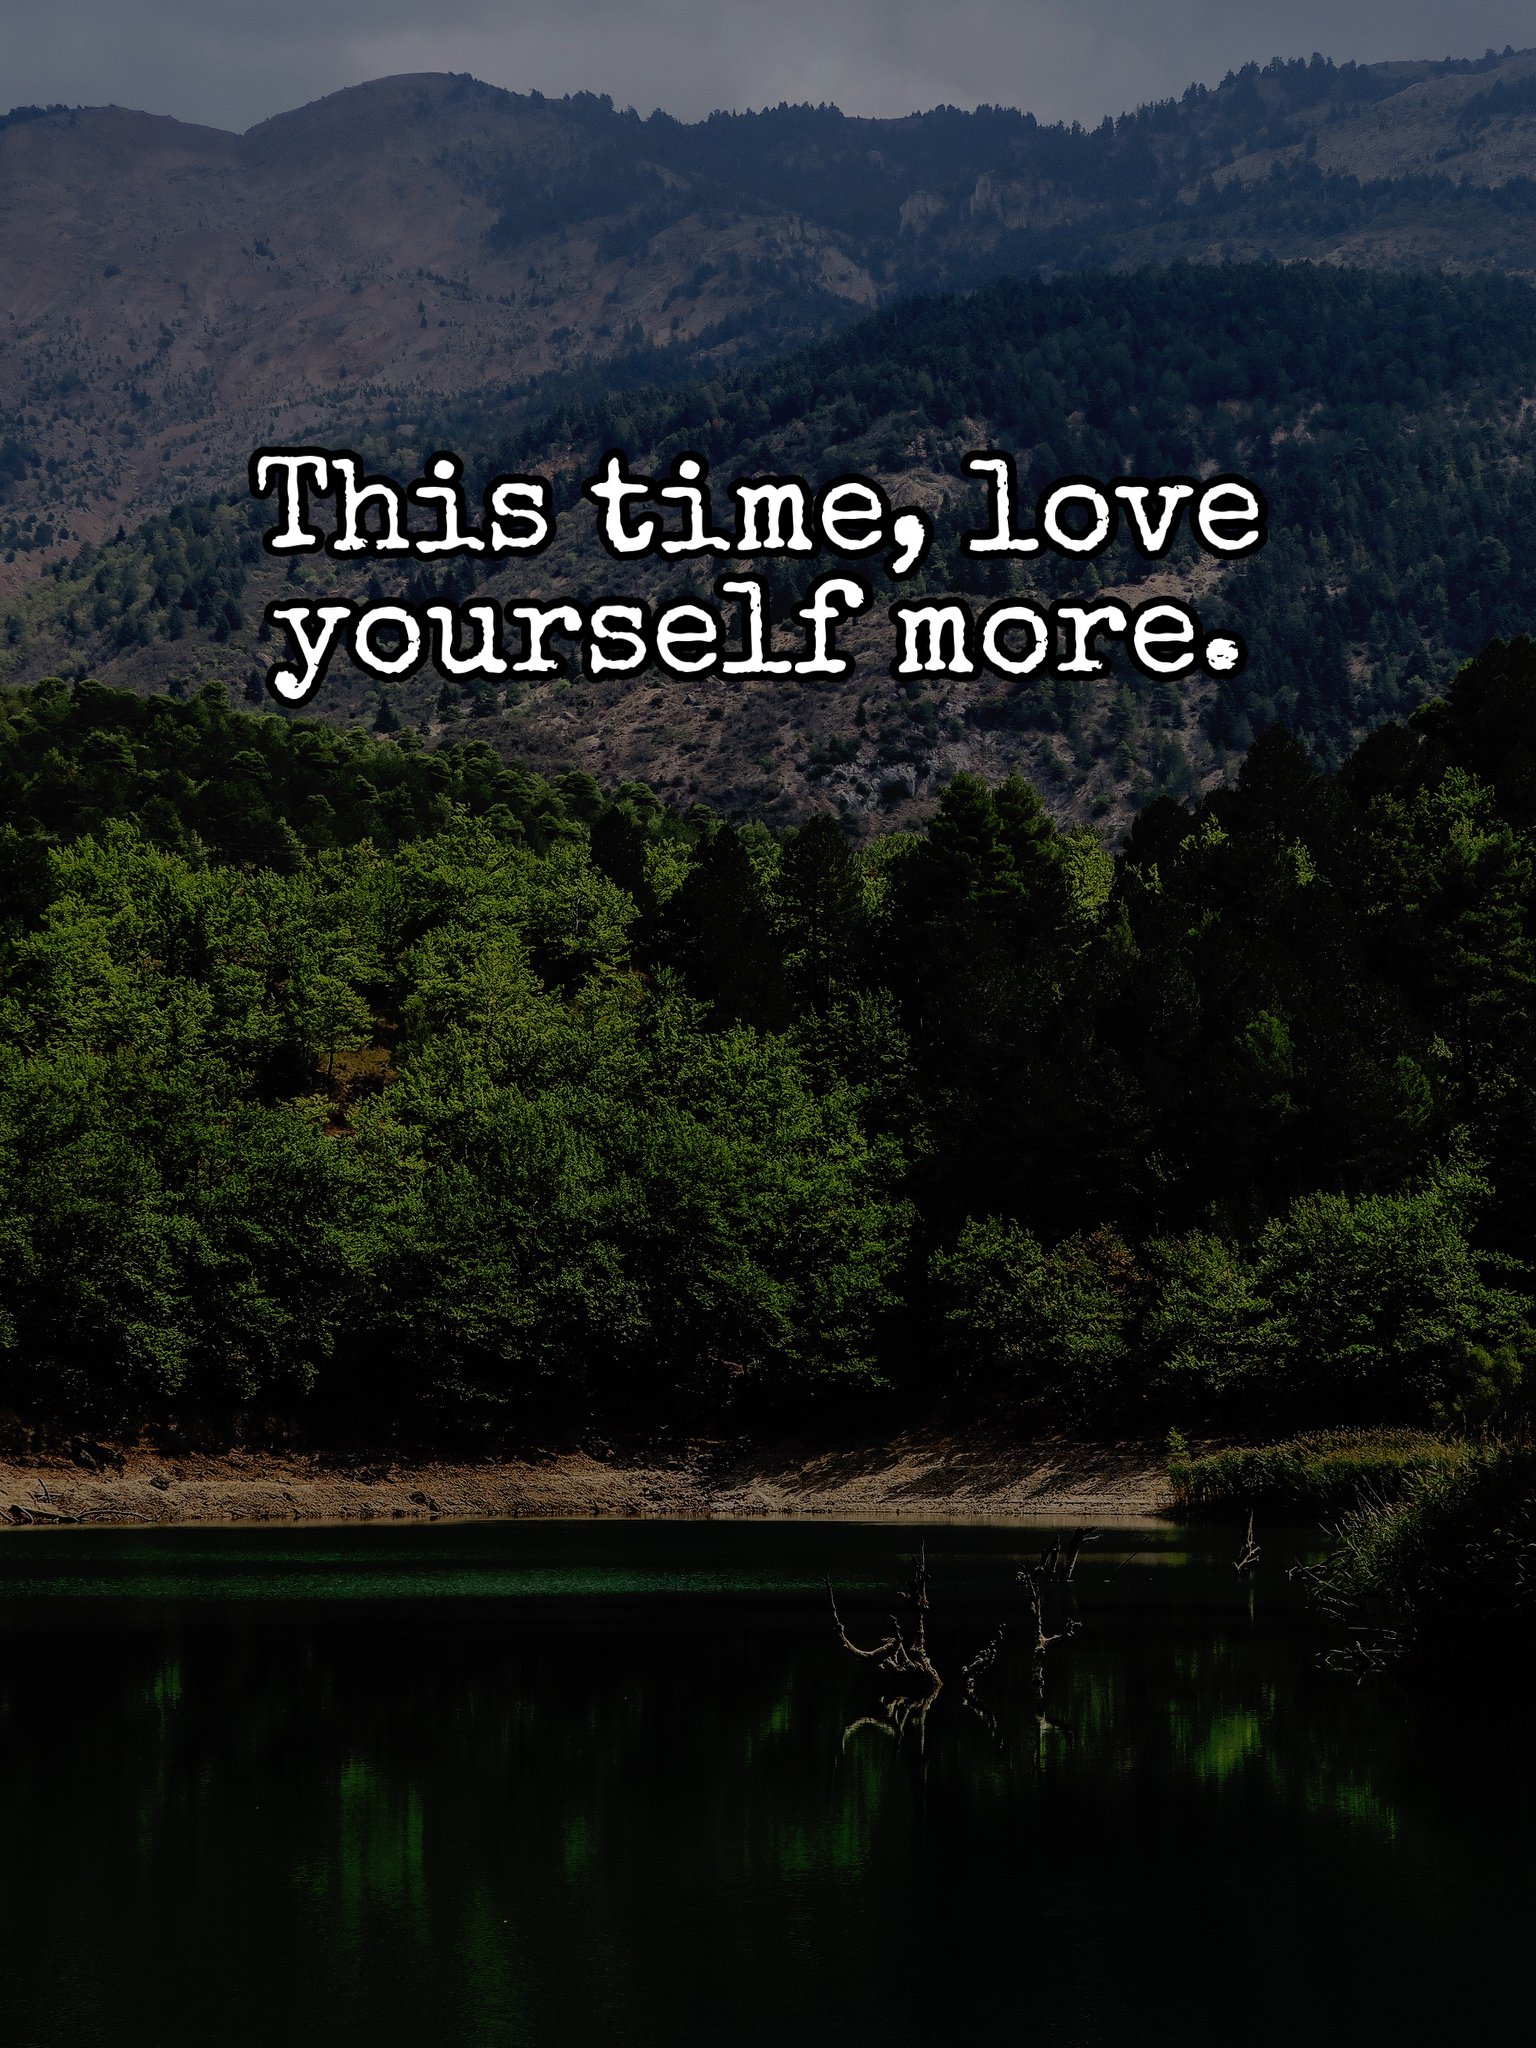 This time, love yourself more.